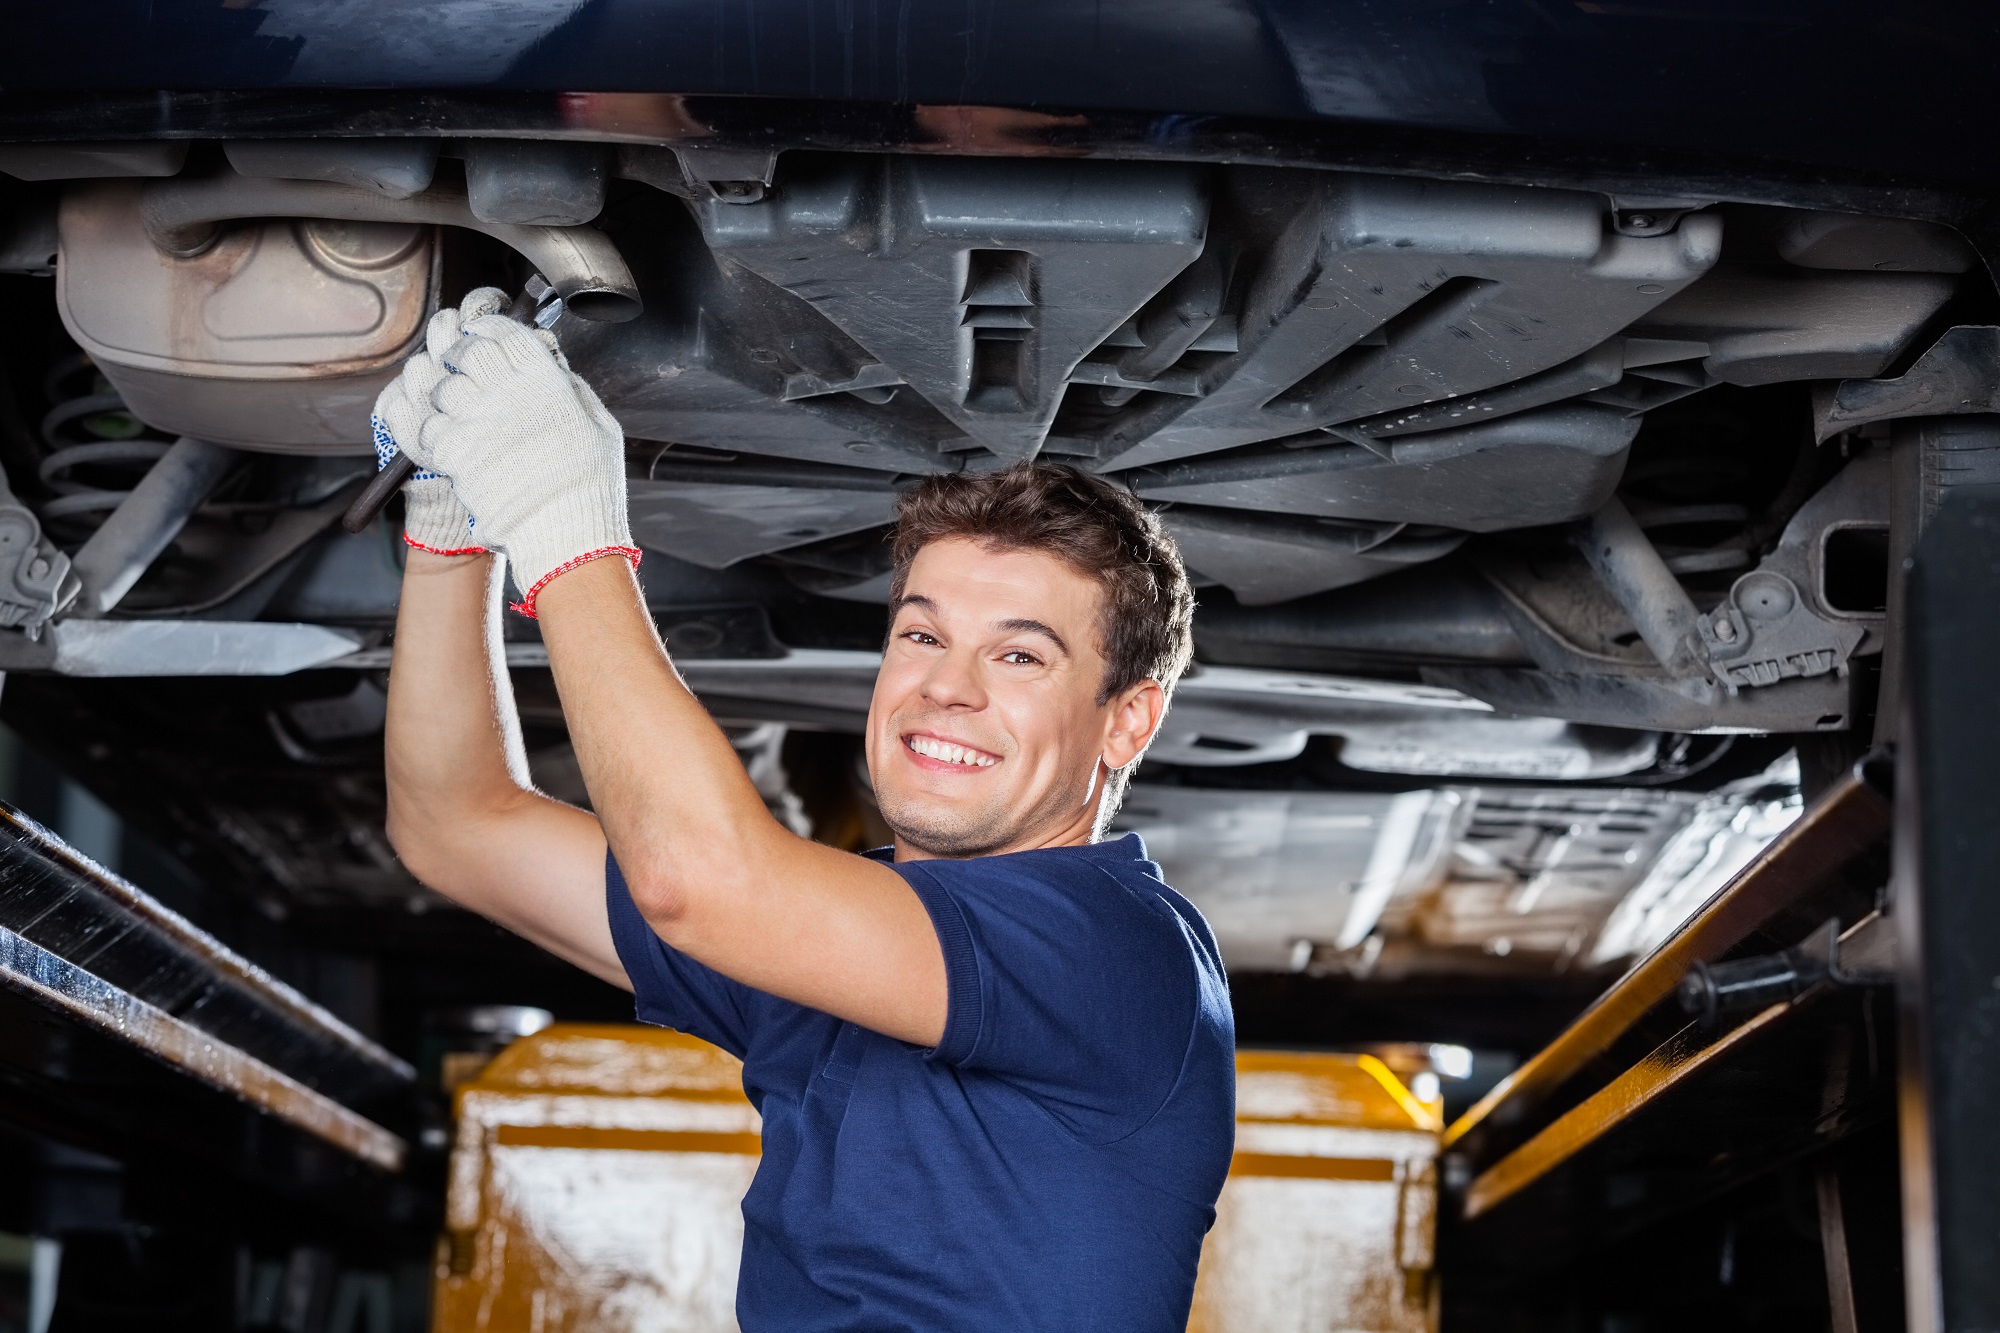 Smiling Mechanic Working Underneath Lifted Car